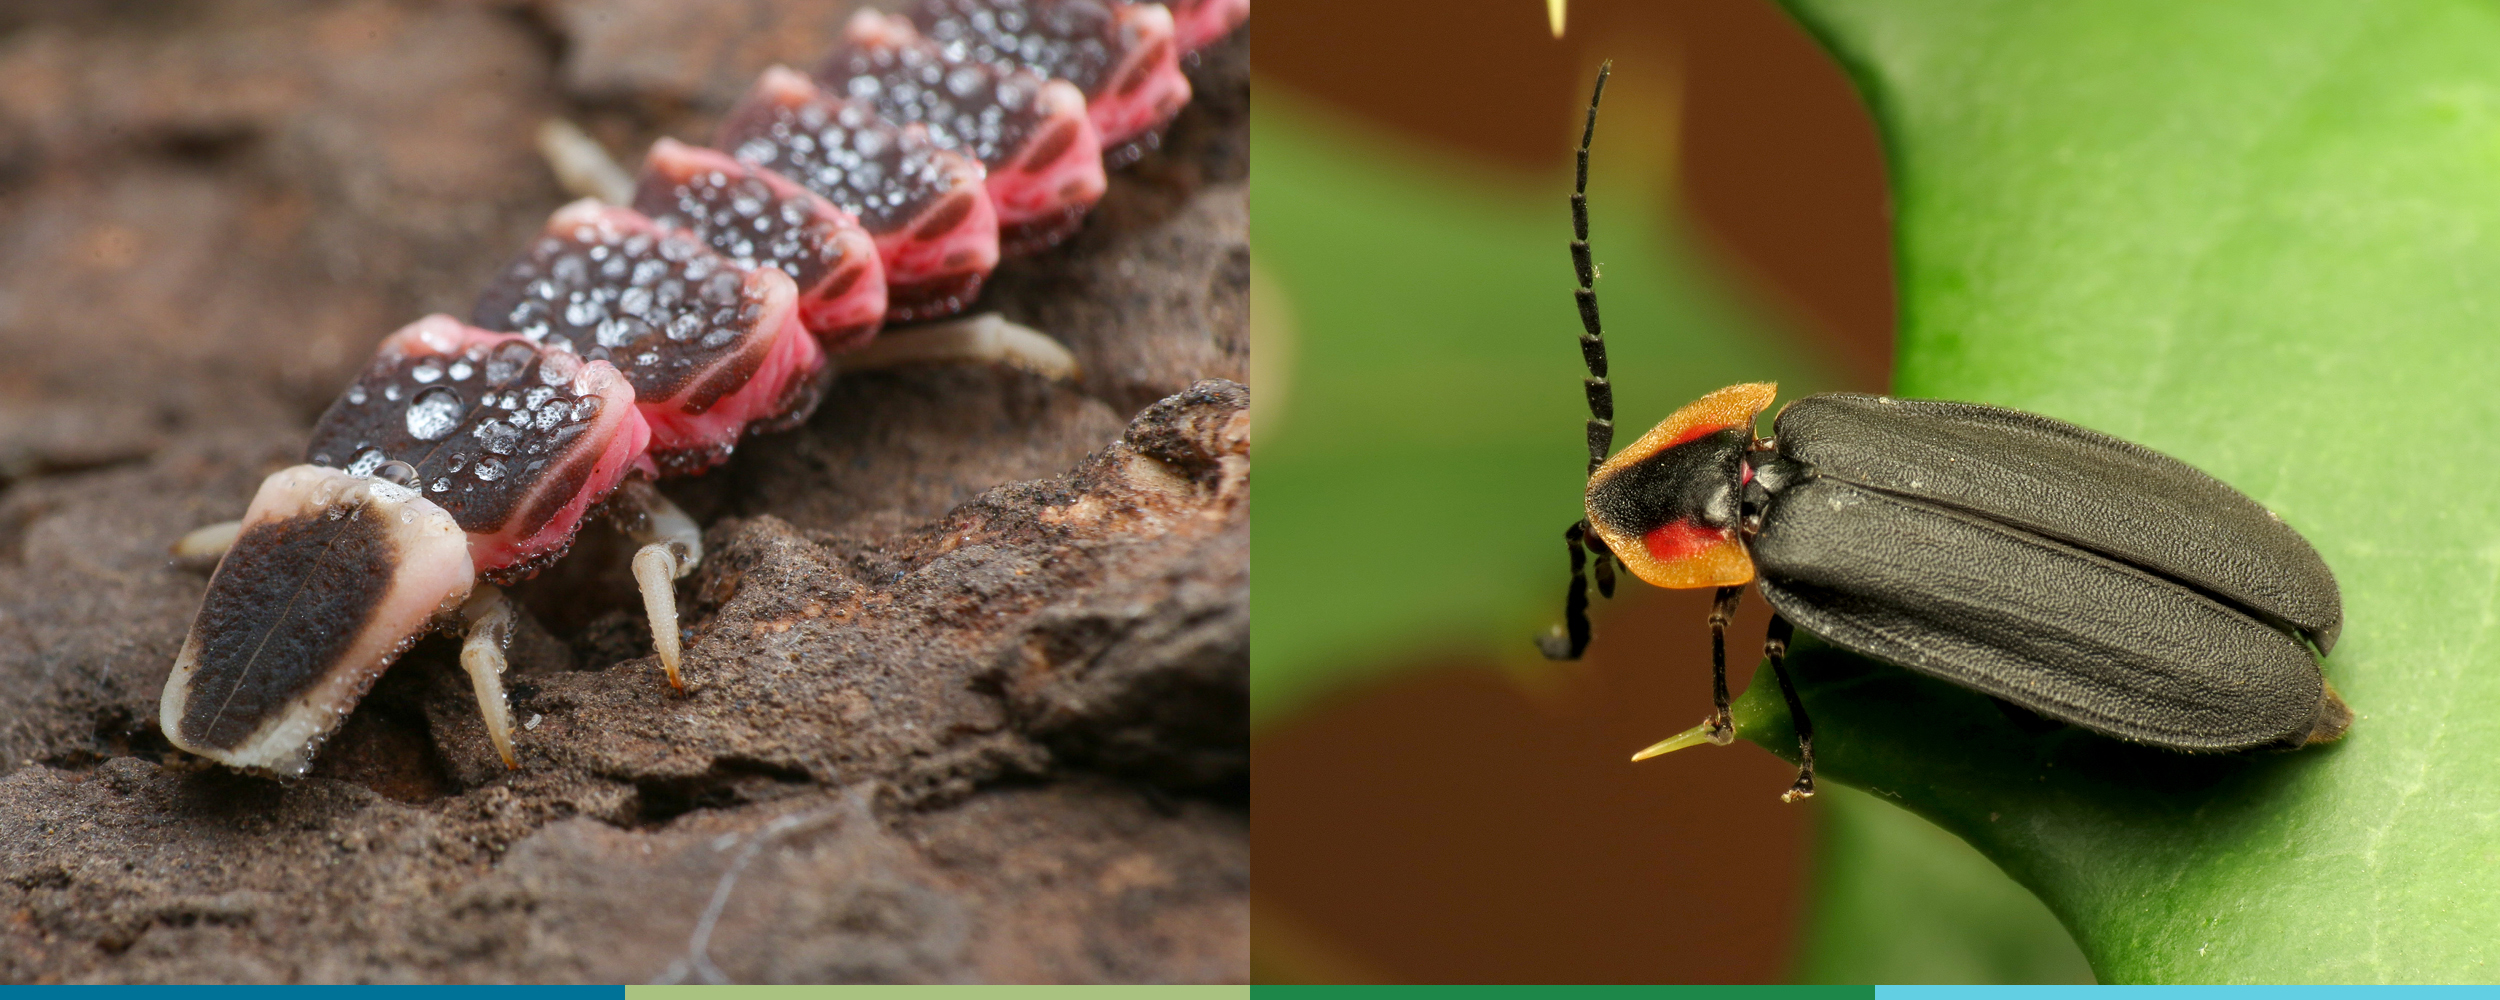 A pair of images: on the left is a glow-worm with a long, segmented body that is dark brown and pink; on the right is a firefly with black body and two red strips behind its head